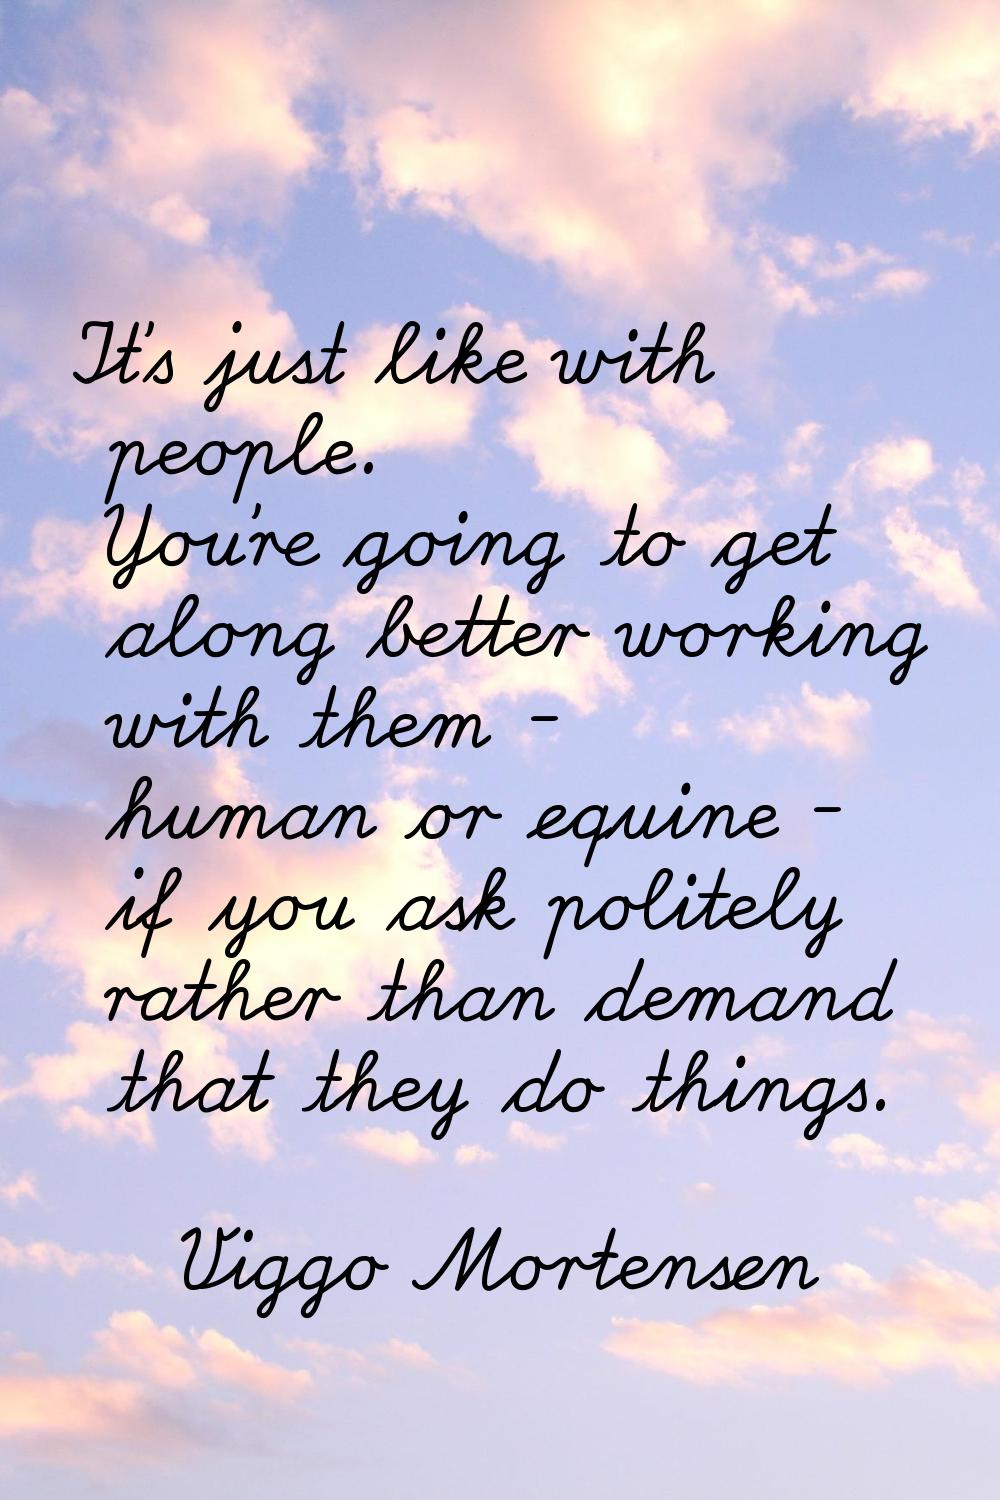 It's just like with people. You're going to get along better working with them - human or equine - 